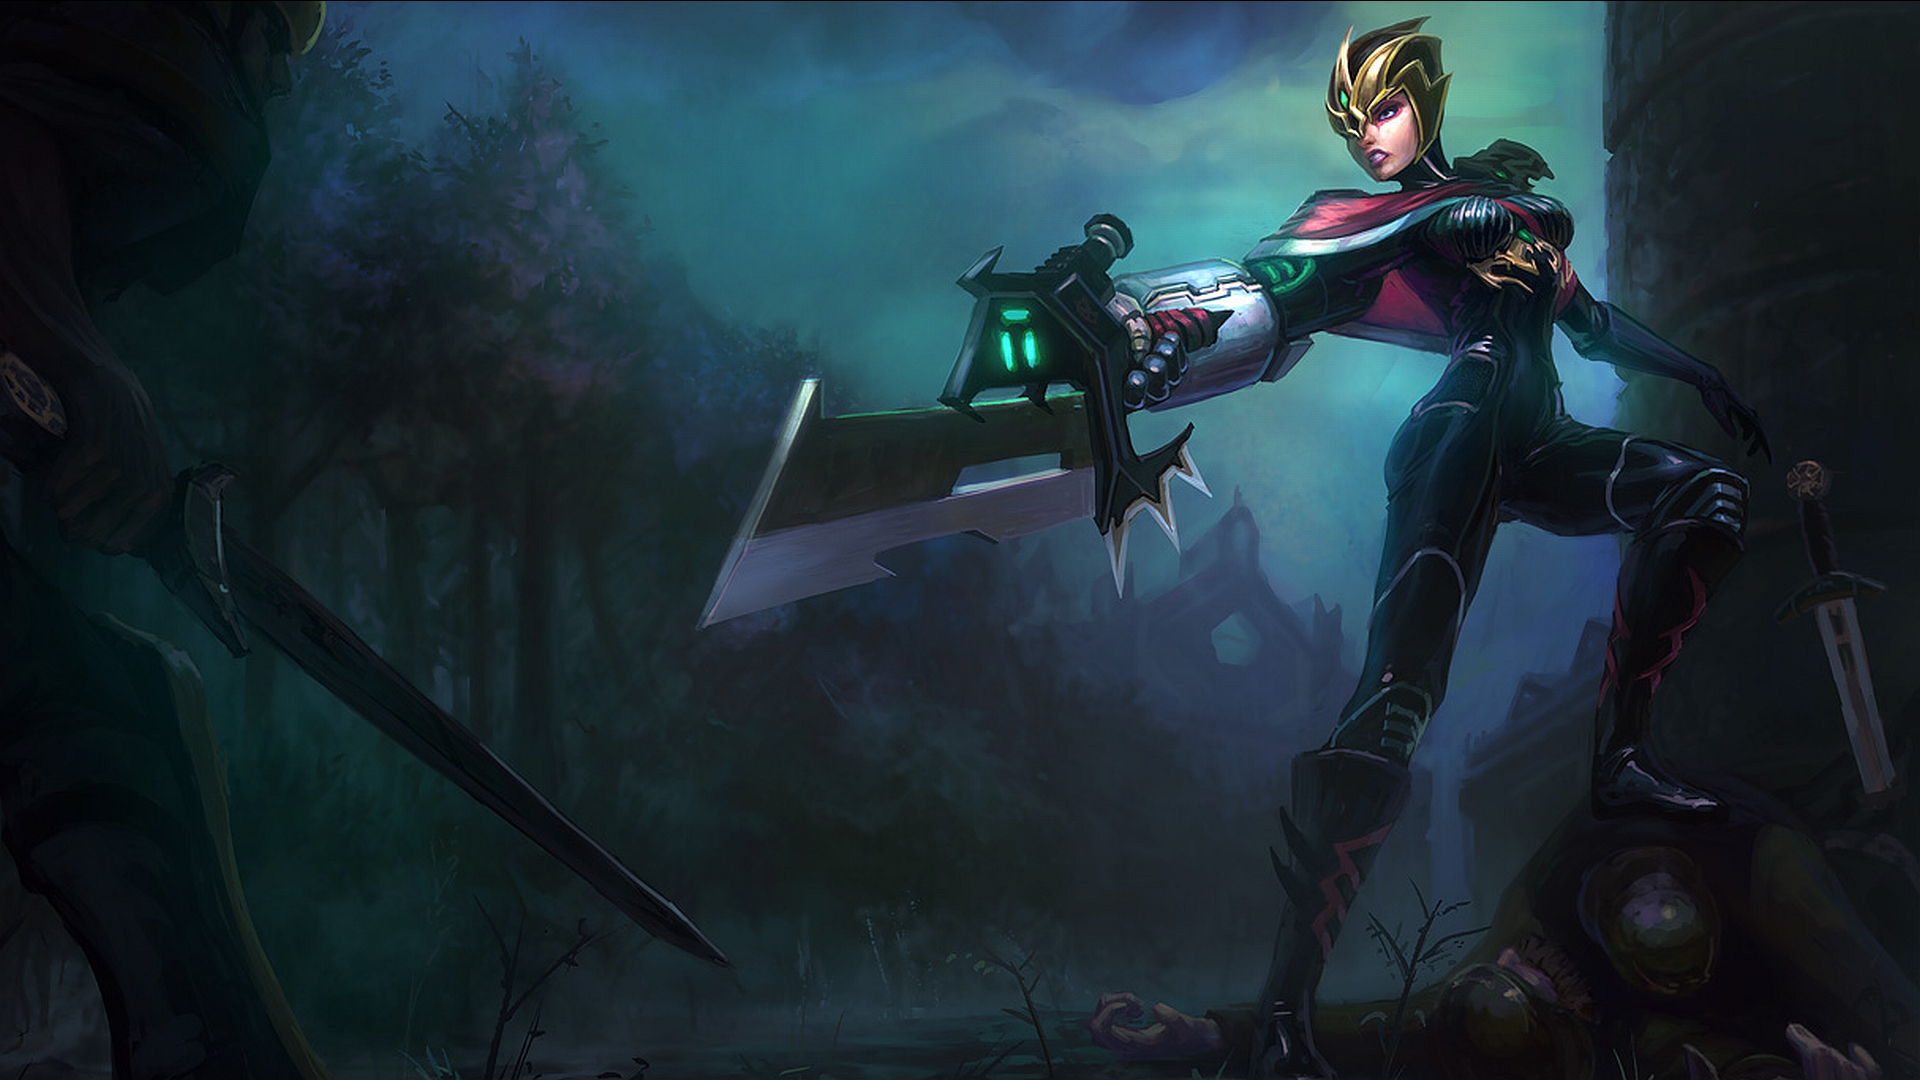 An epic digital artwork featuring Riven from League of Legends, ready to conquer the battlefield. #LeagueOfLegends